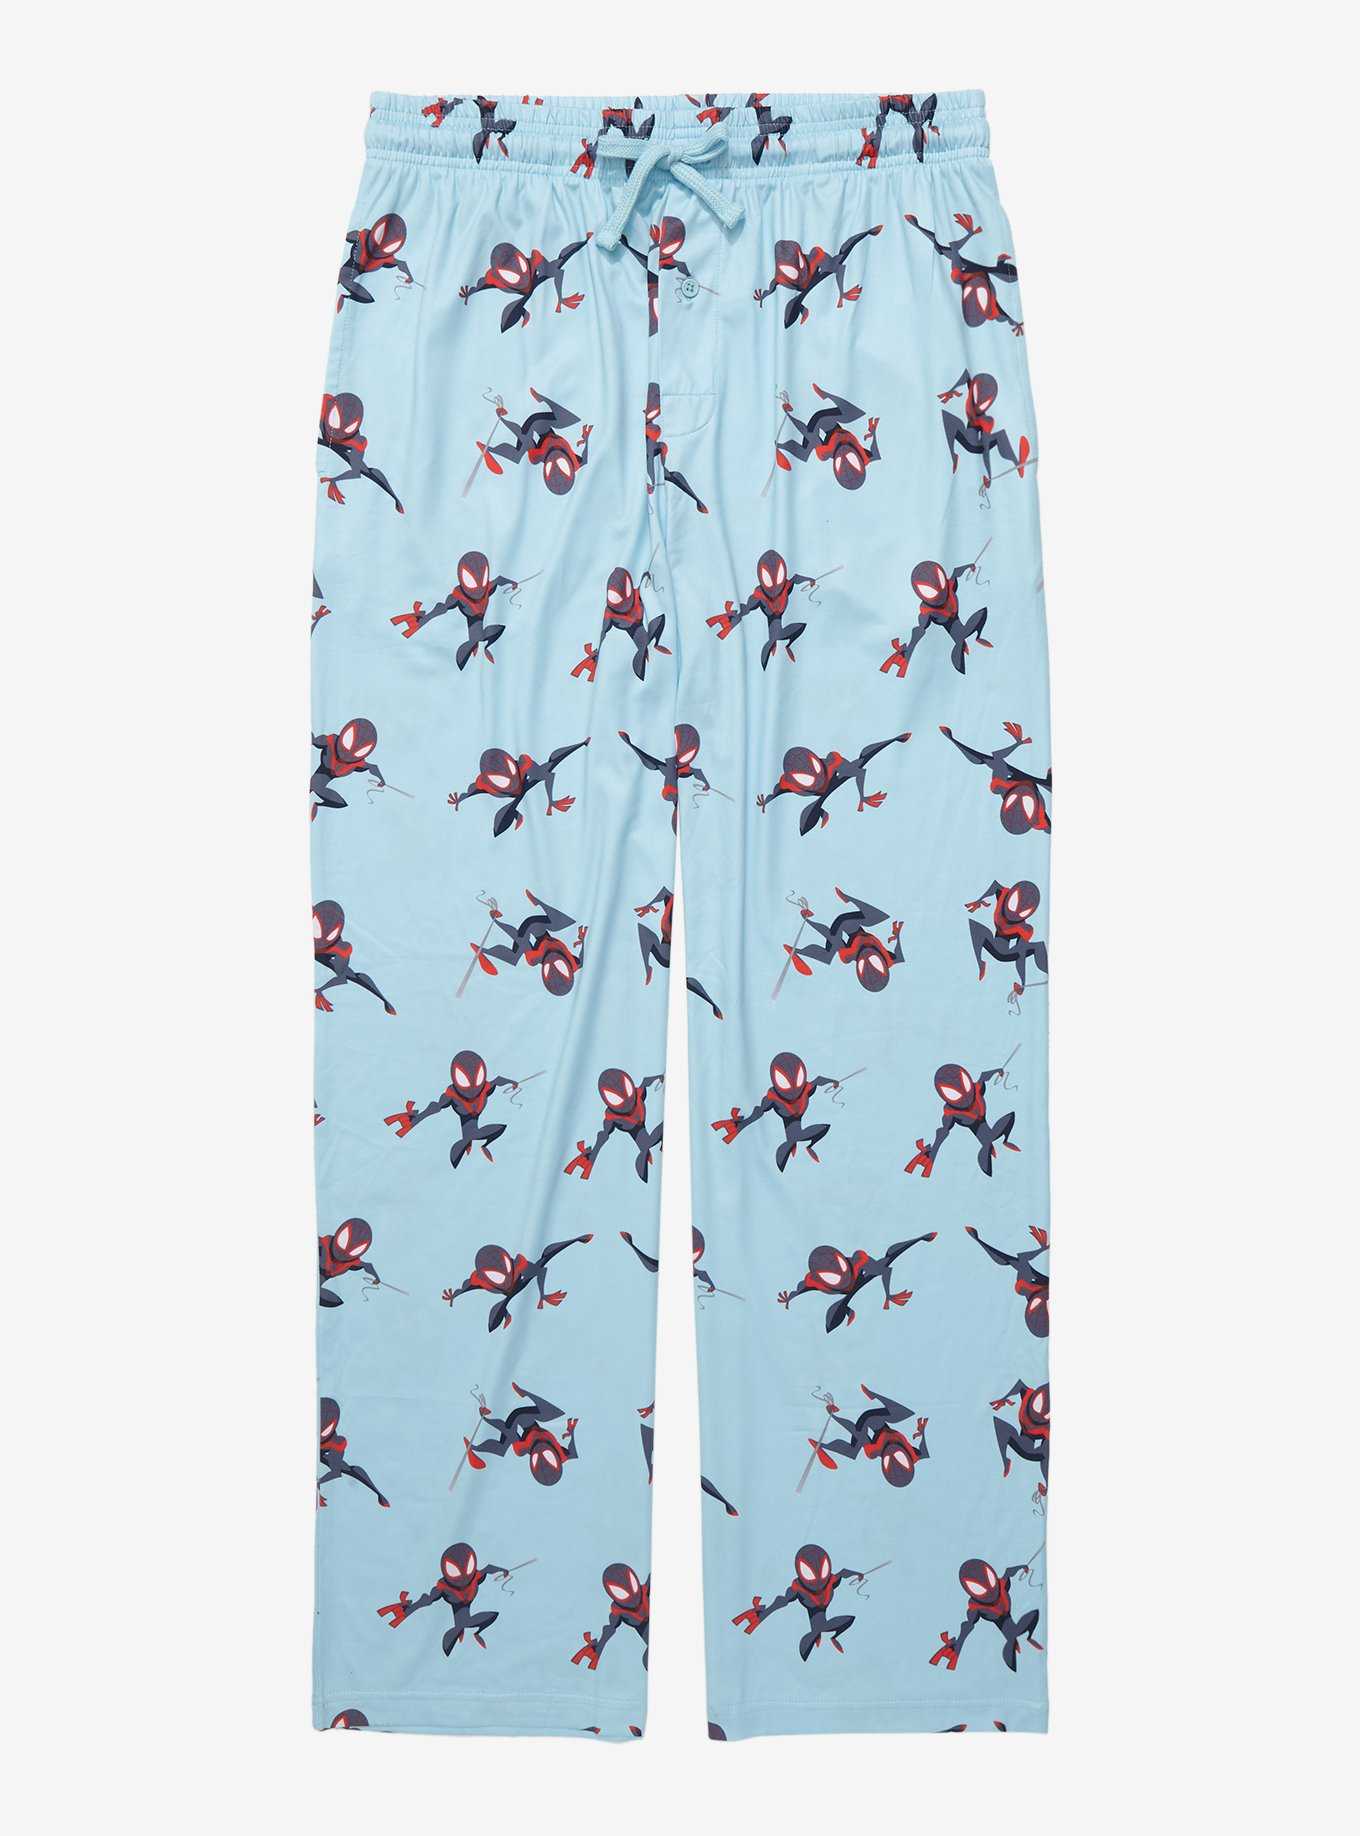 Marvel Spider-Man: Into the Spider-Verse Miles Morales Allover Print Sleep Pants, , hi-res